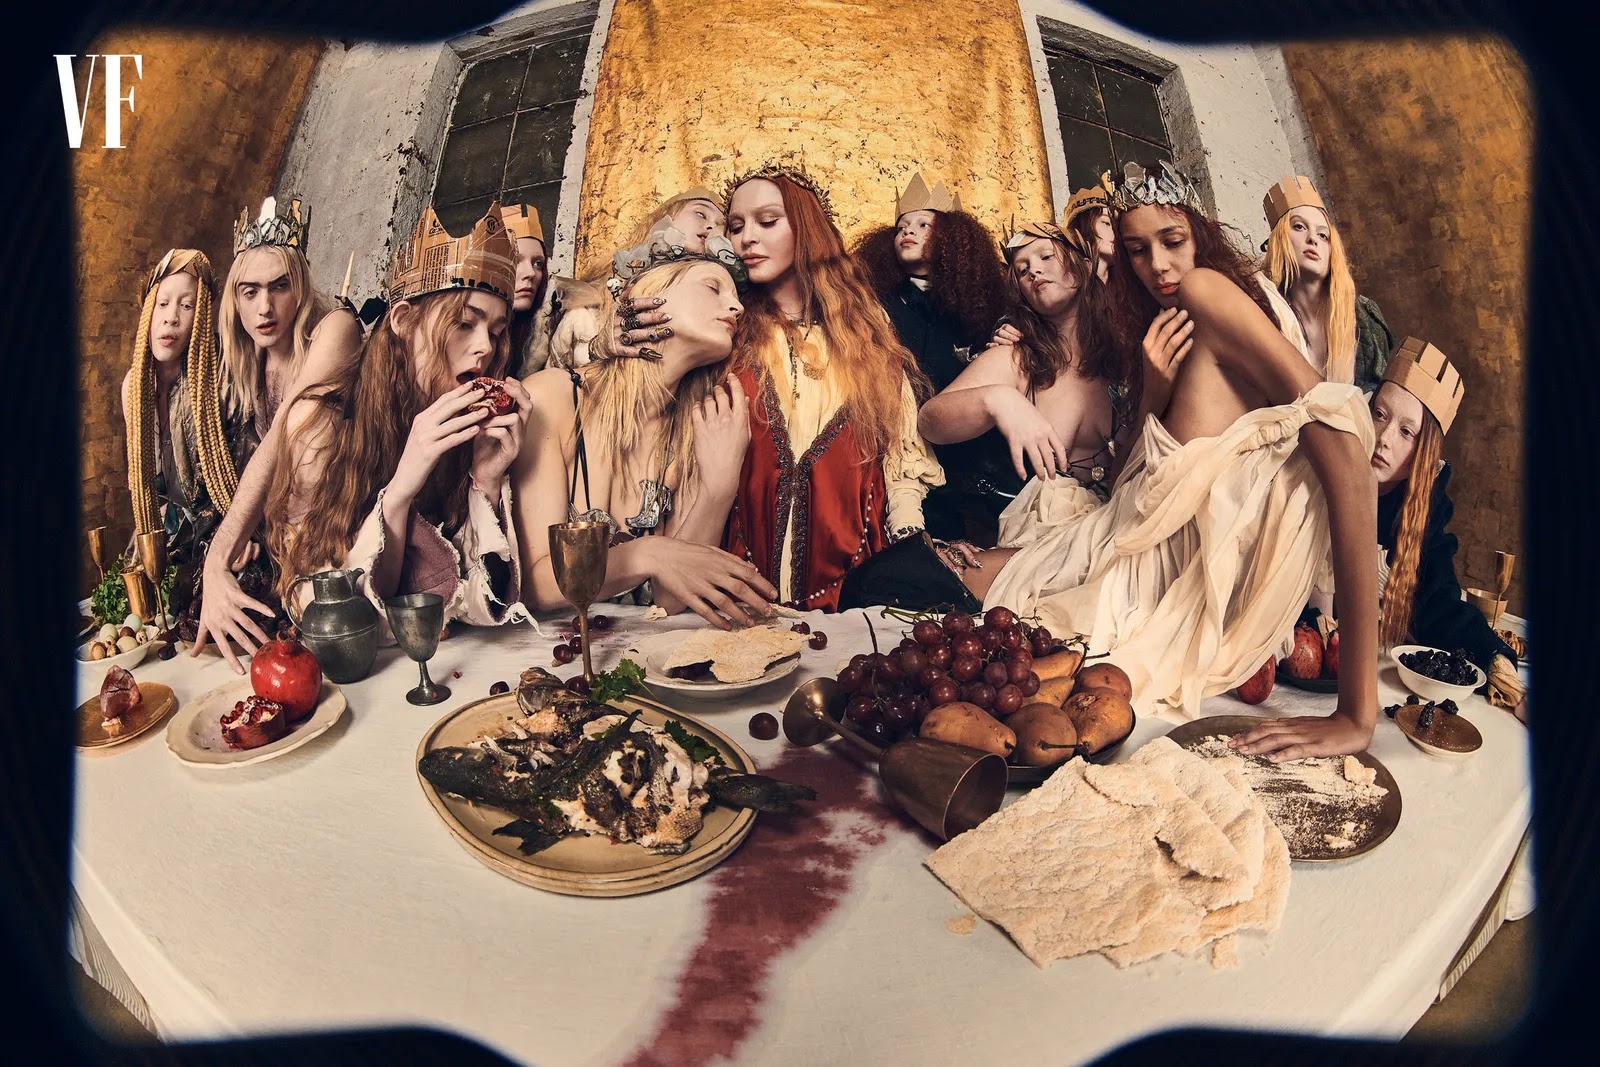 Demonic: Madonna Criticized for “Mocking Jesus” with “Blasphemous” Last Supper Photoshoot and Portraying Virgin Mary for Vanity Fair